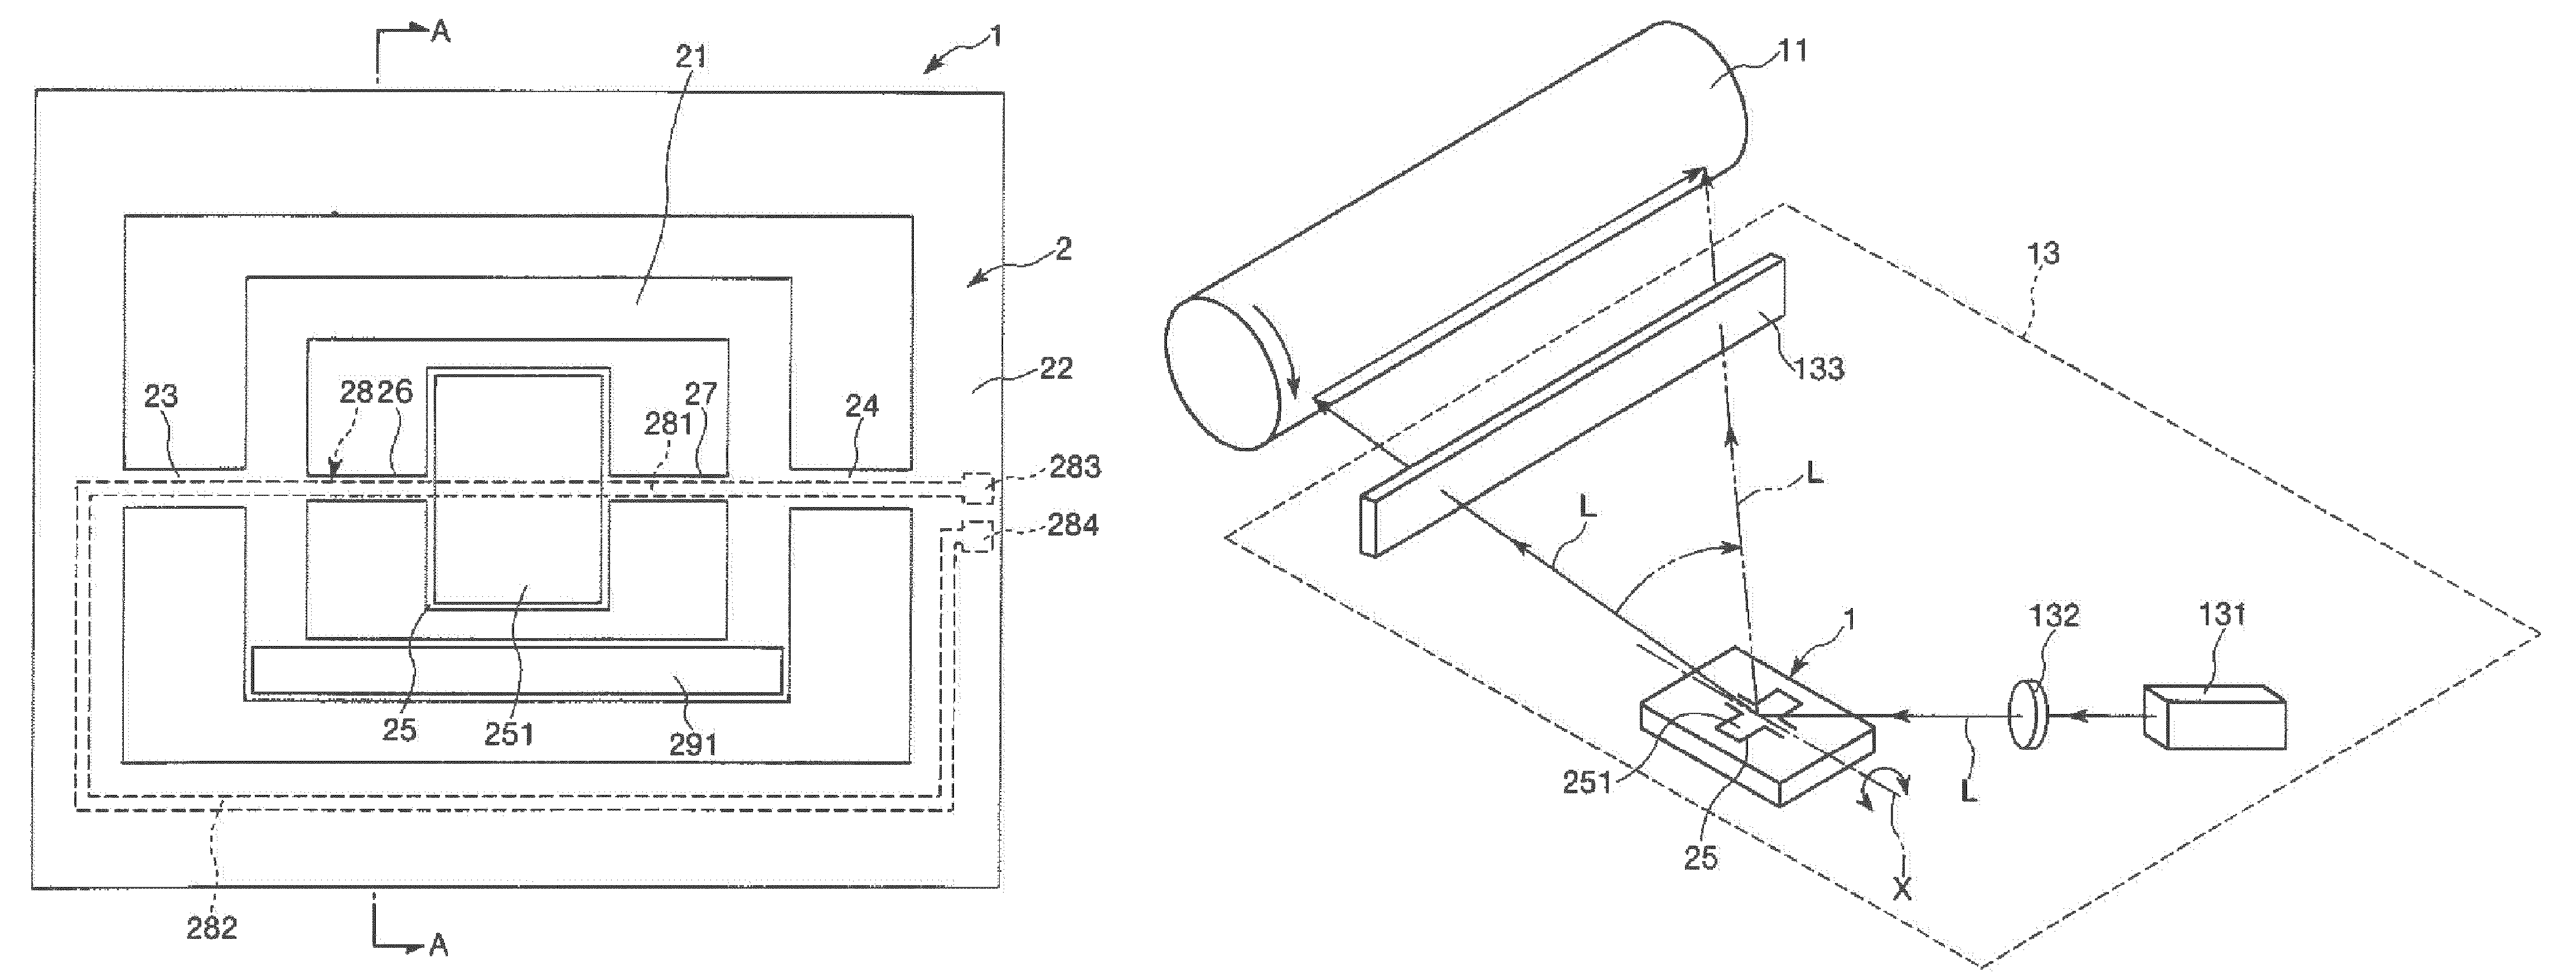 Actuator, optical scanner, and image forming apparatus